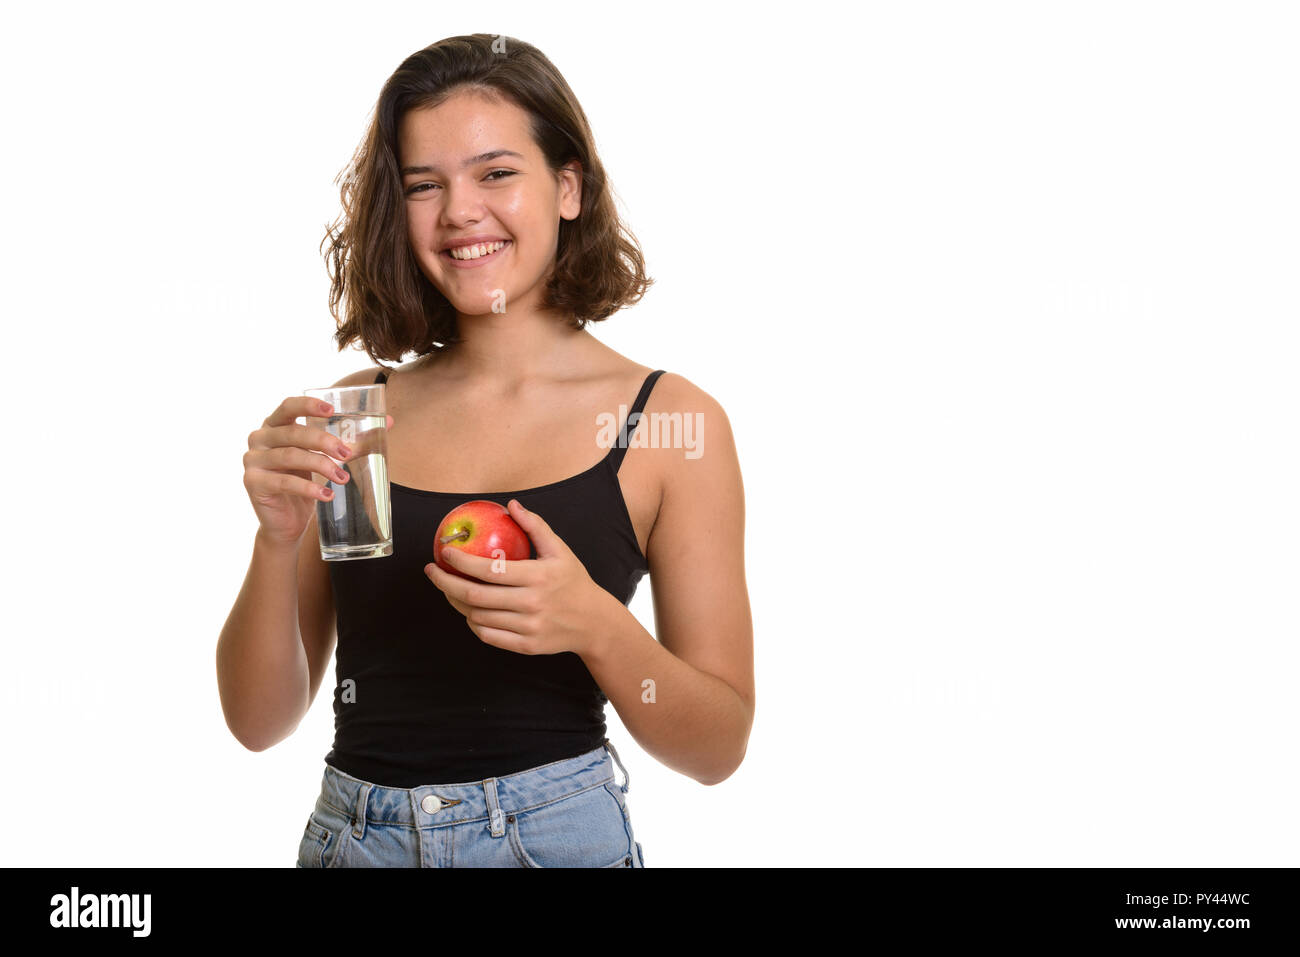 Young happy Caucasian teenage girl smiling while holding glass o Stock Photo